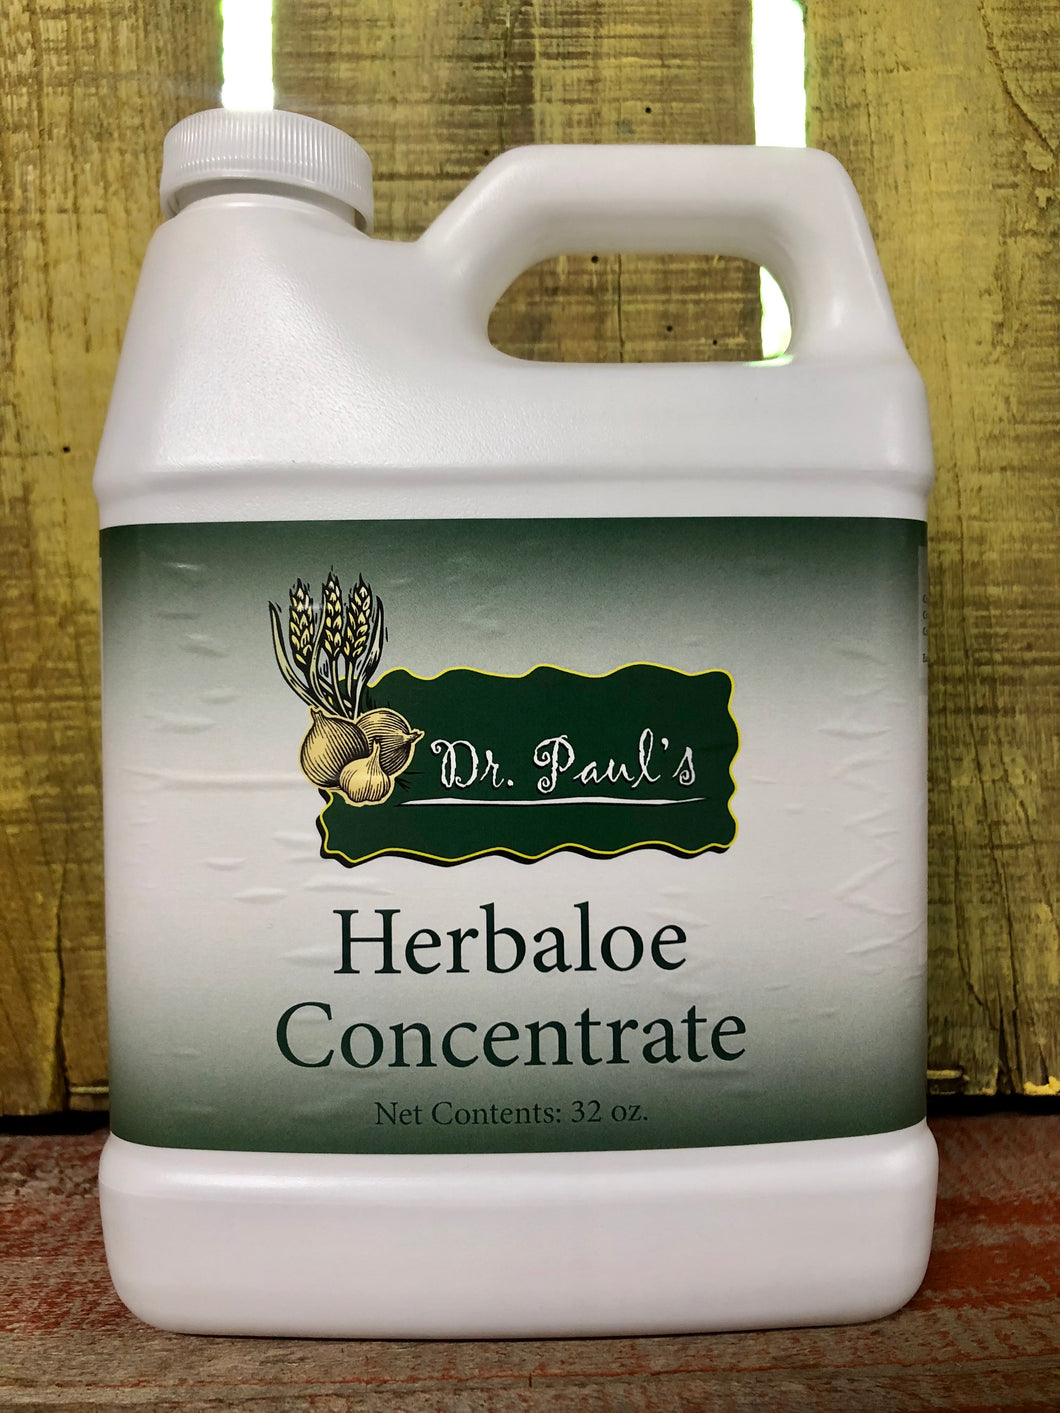 Herbaloe Concentrate